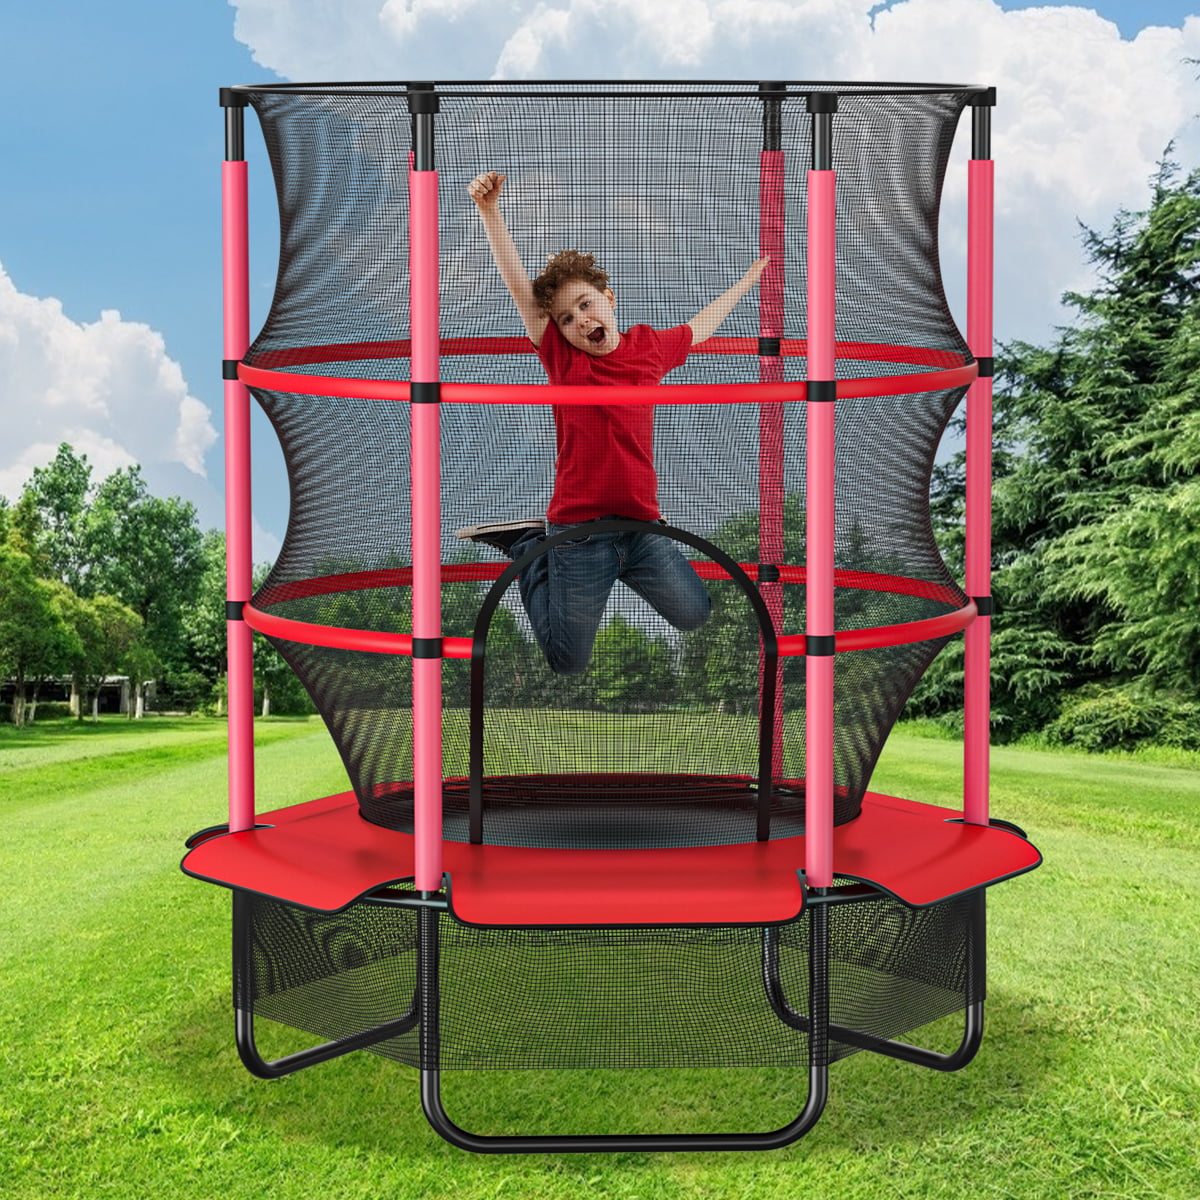 Trampoline Kids Toys Net Outdoor Safety Enclosure Padded 4.5ft Bungee Suspension 